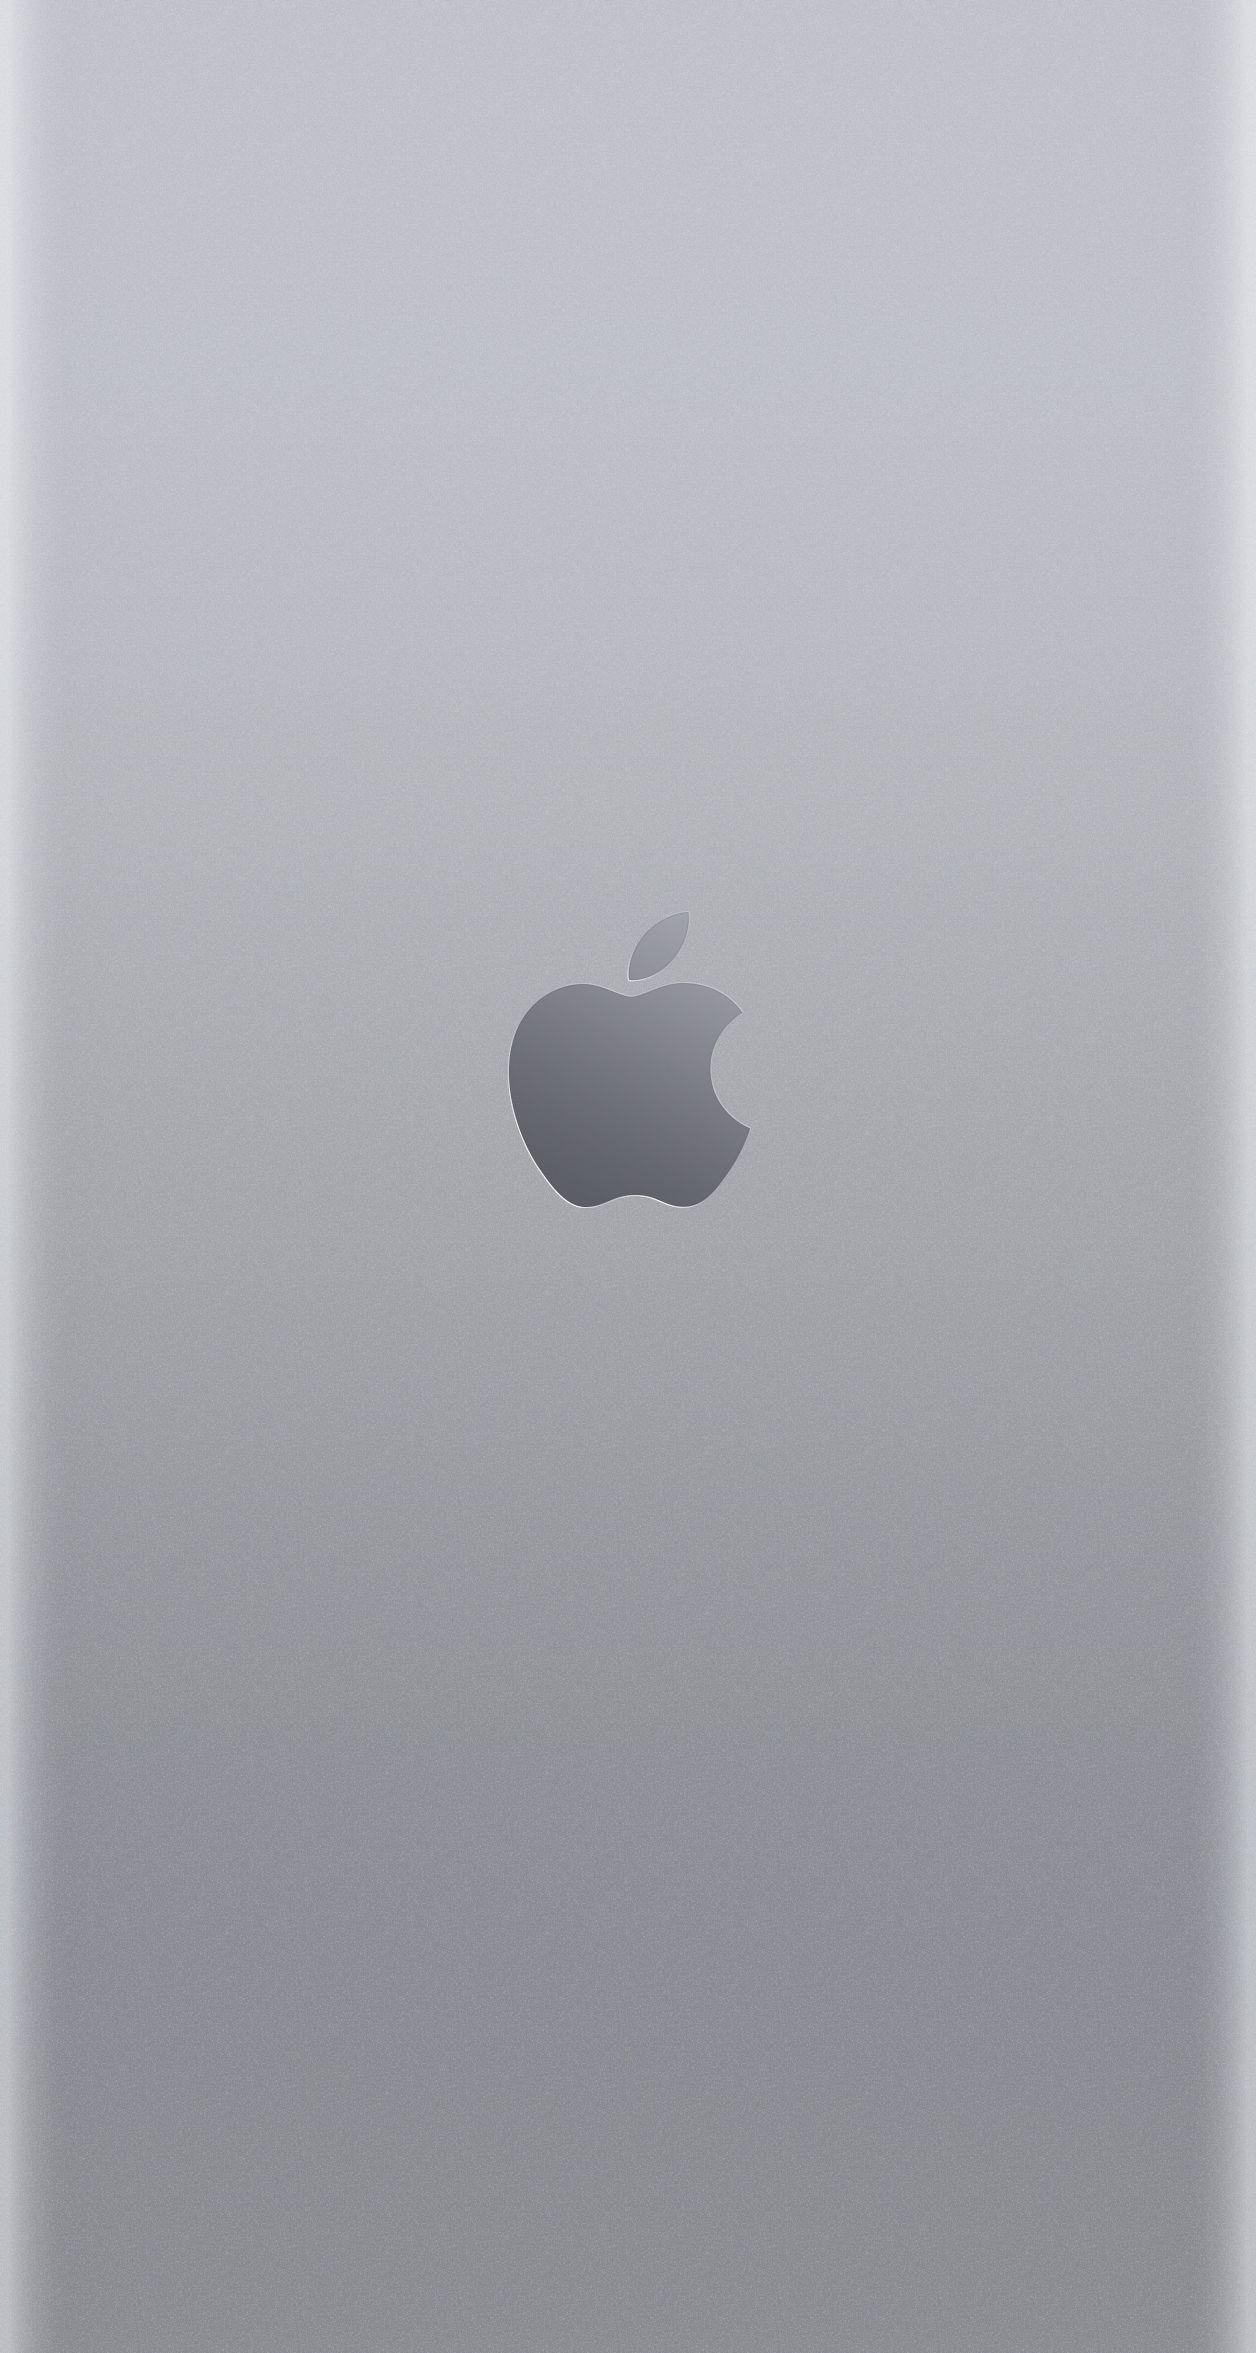 Silver 6 Logo - Apple logo wallpapers for iPhone 6